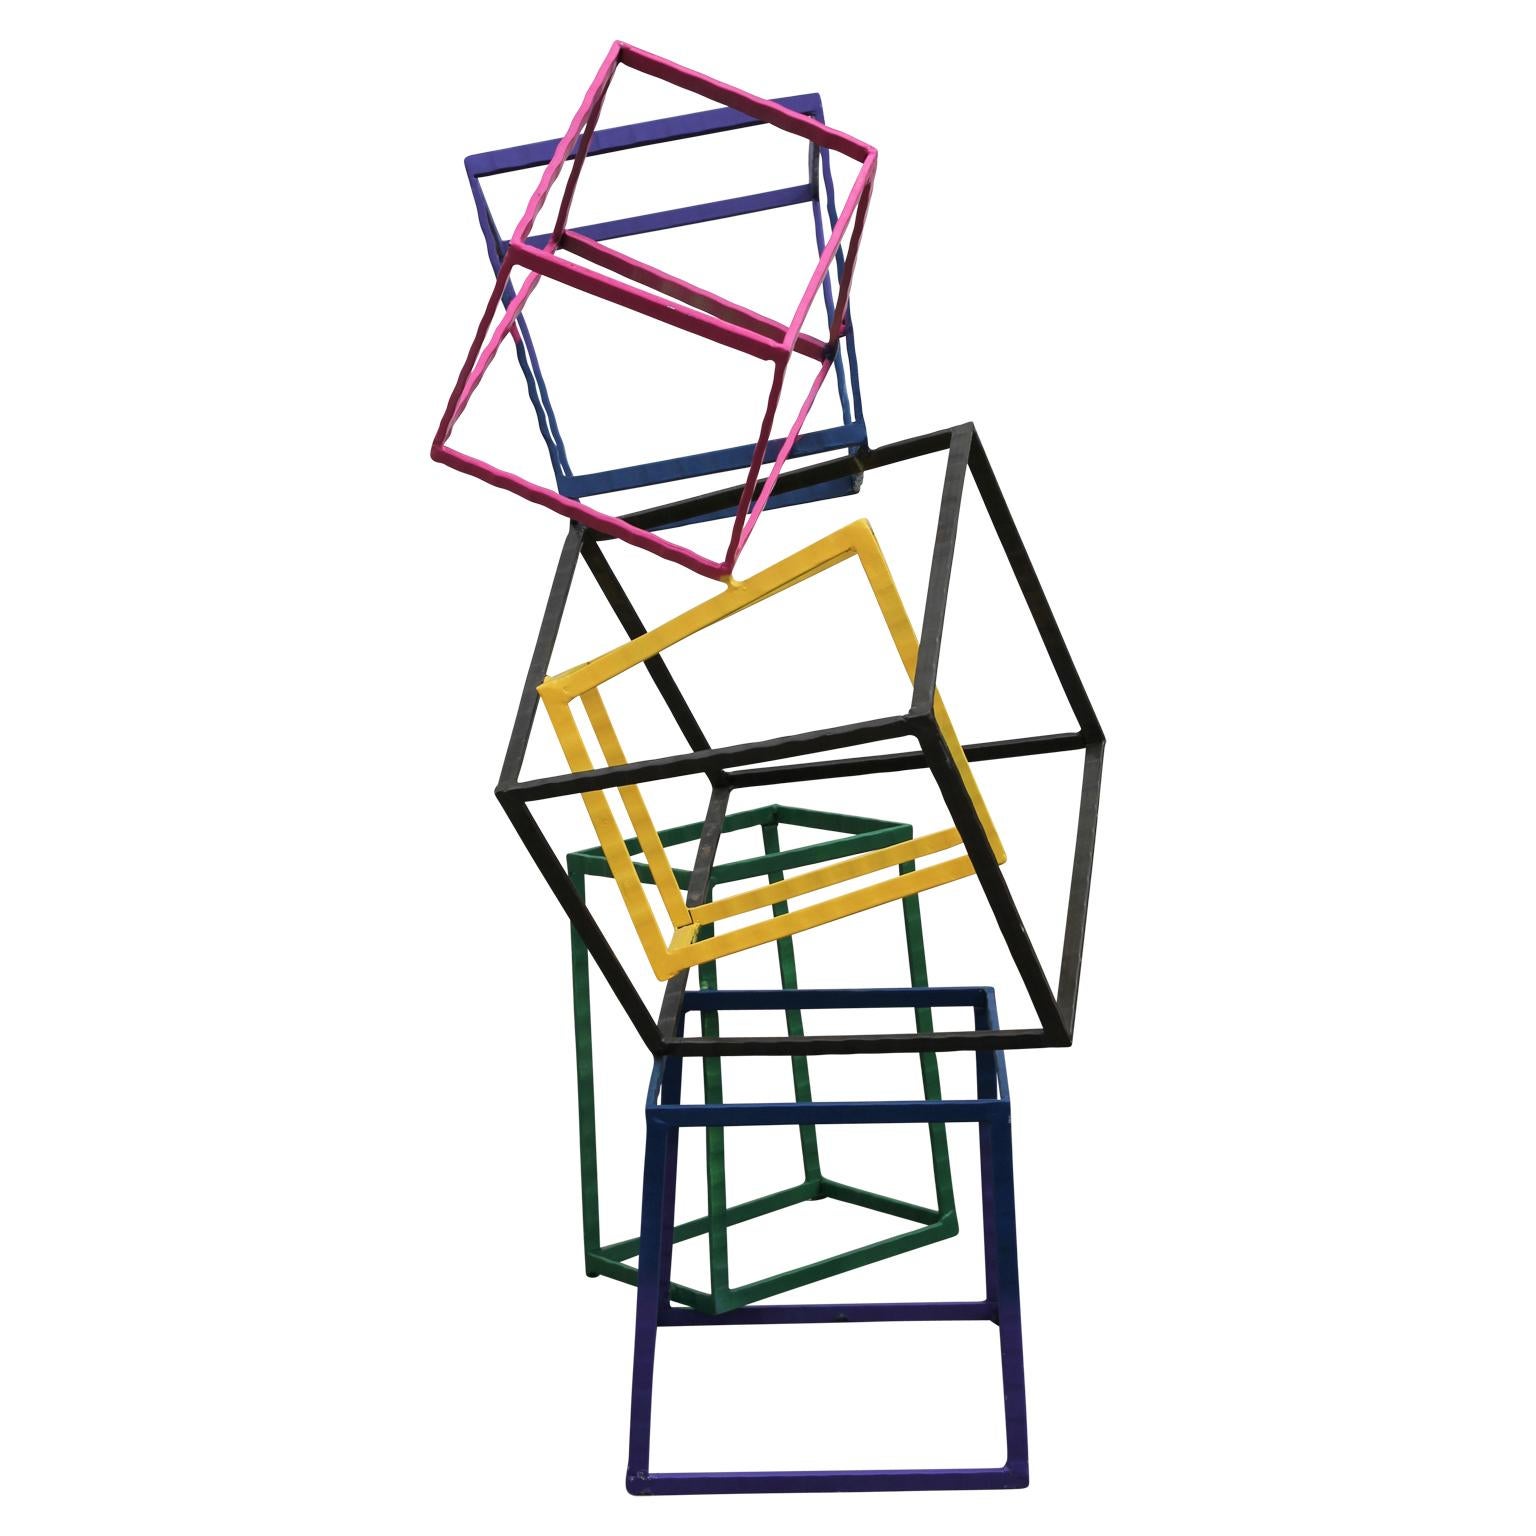 Post Modern Abstract Colorful Geometric Stacked Squares Sculpture 2